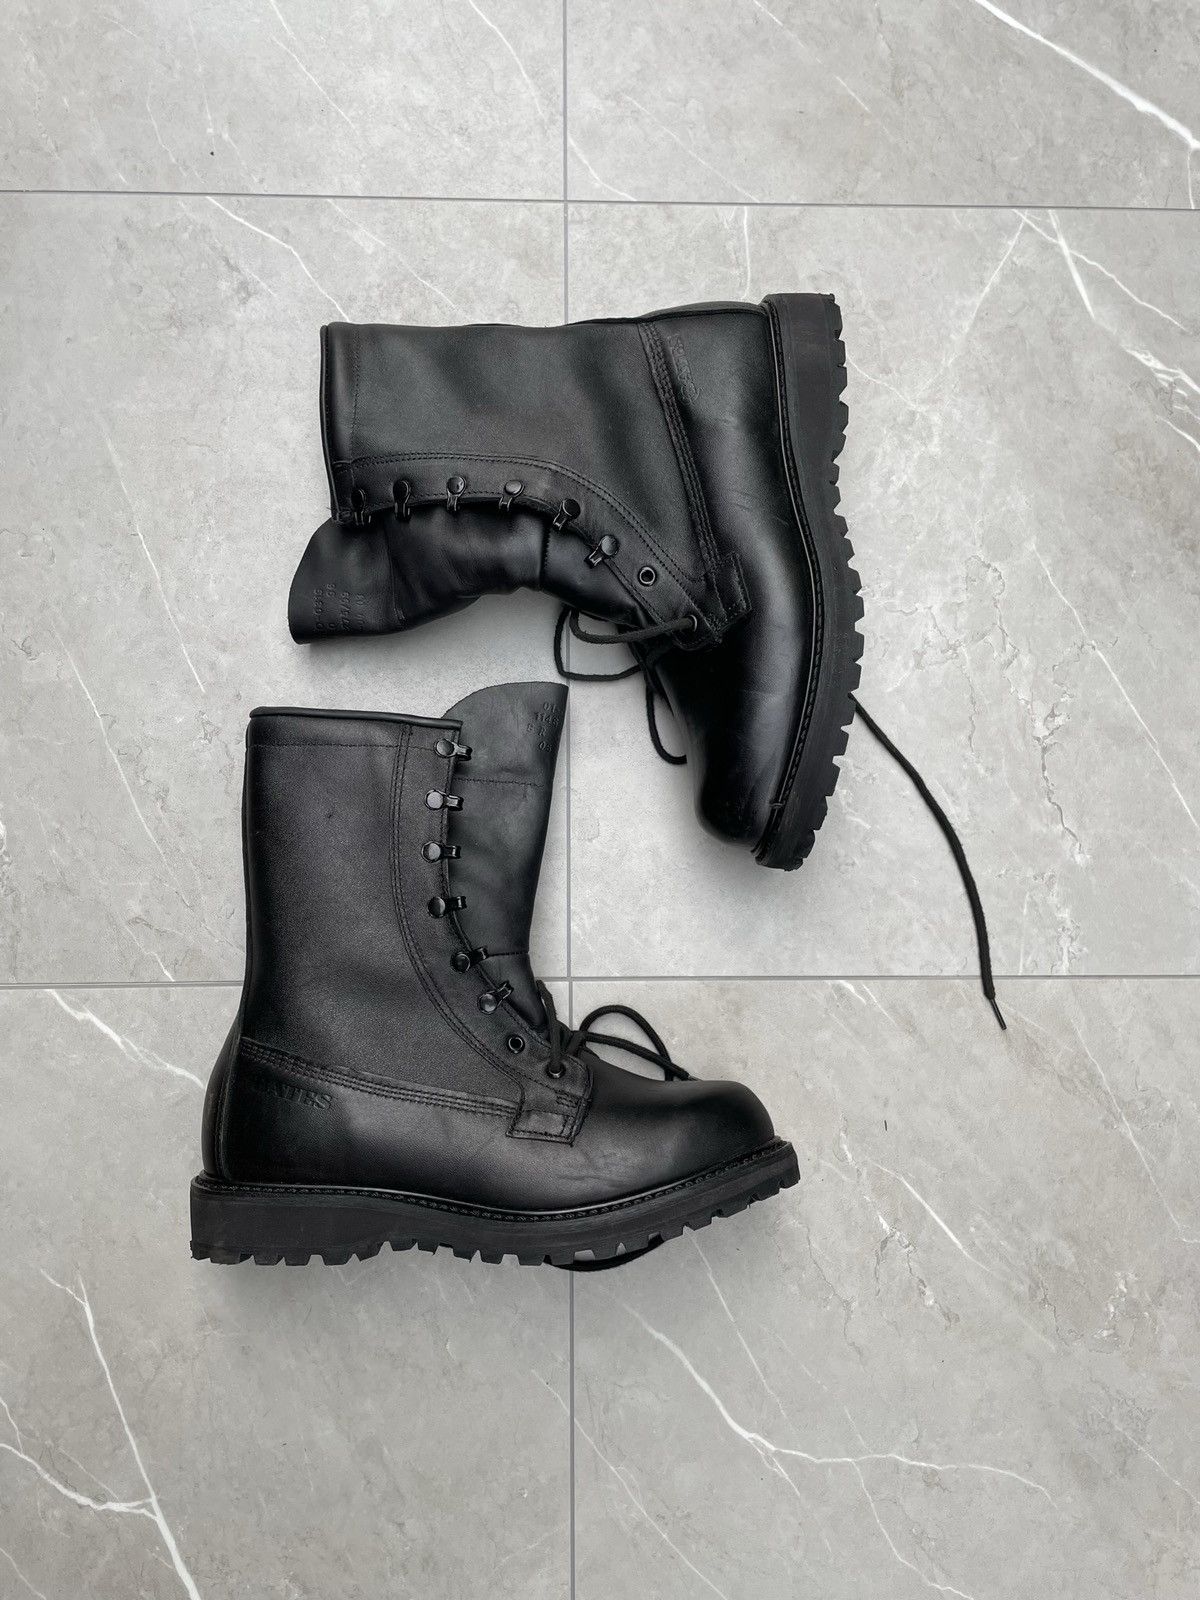 Pre-owned Combat Boots X Military Vintage Combat Boots In Black